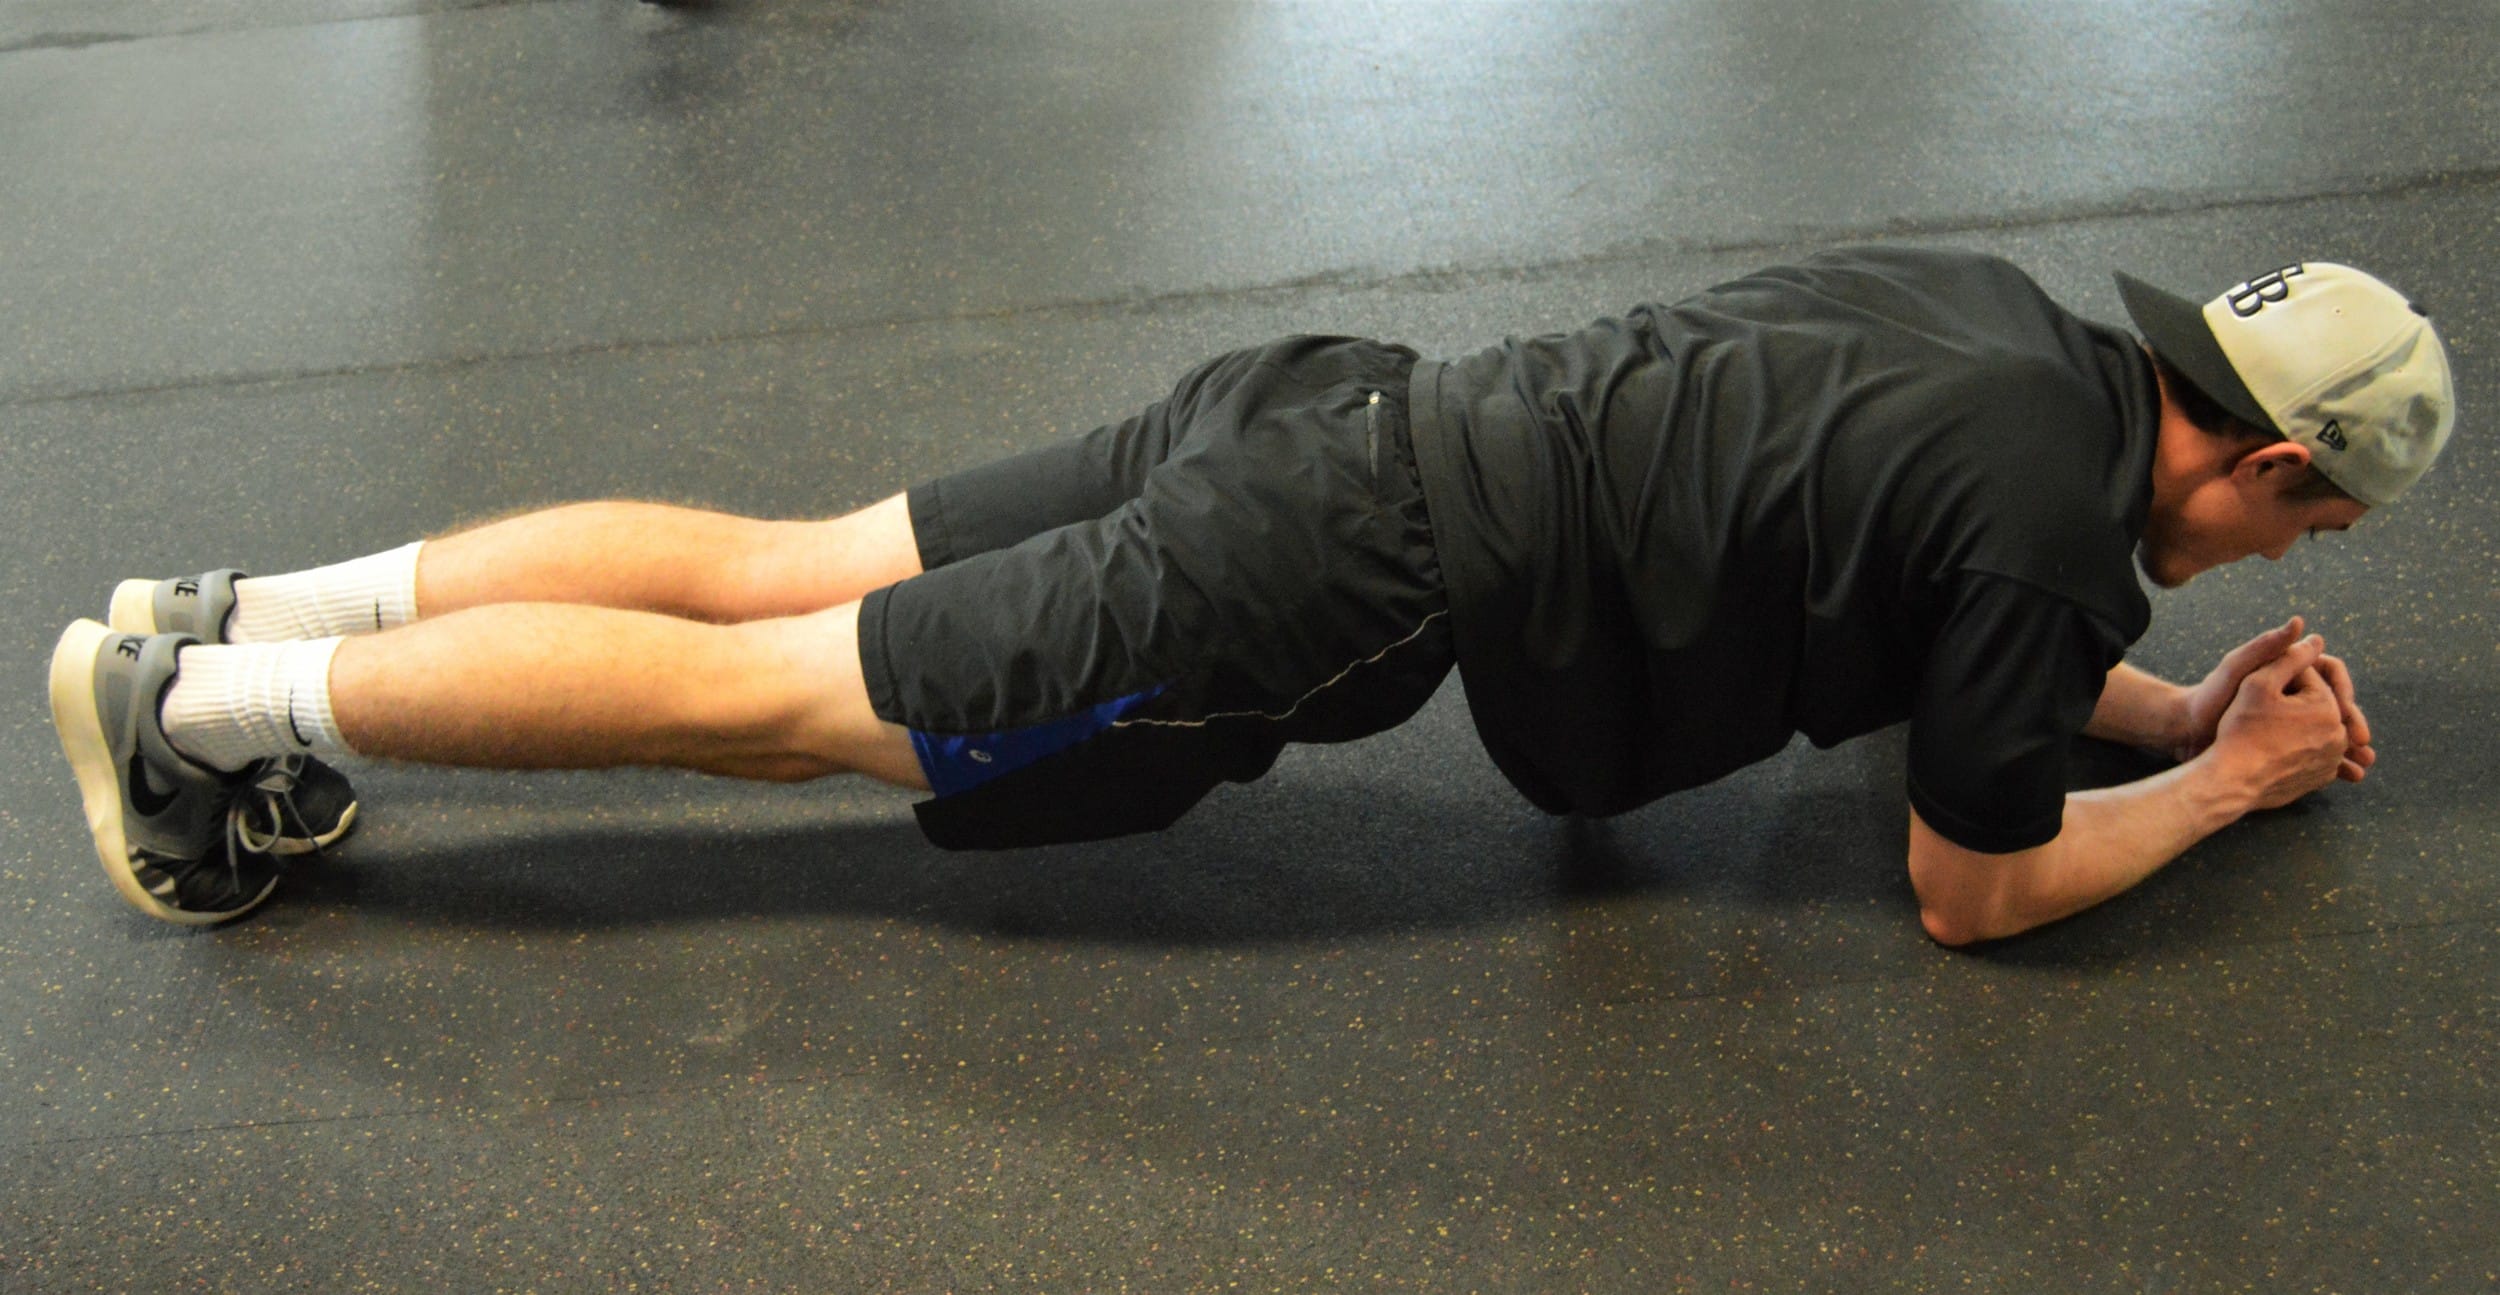 This plank exercise works your core. Try holding it for at least a minute!